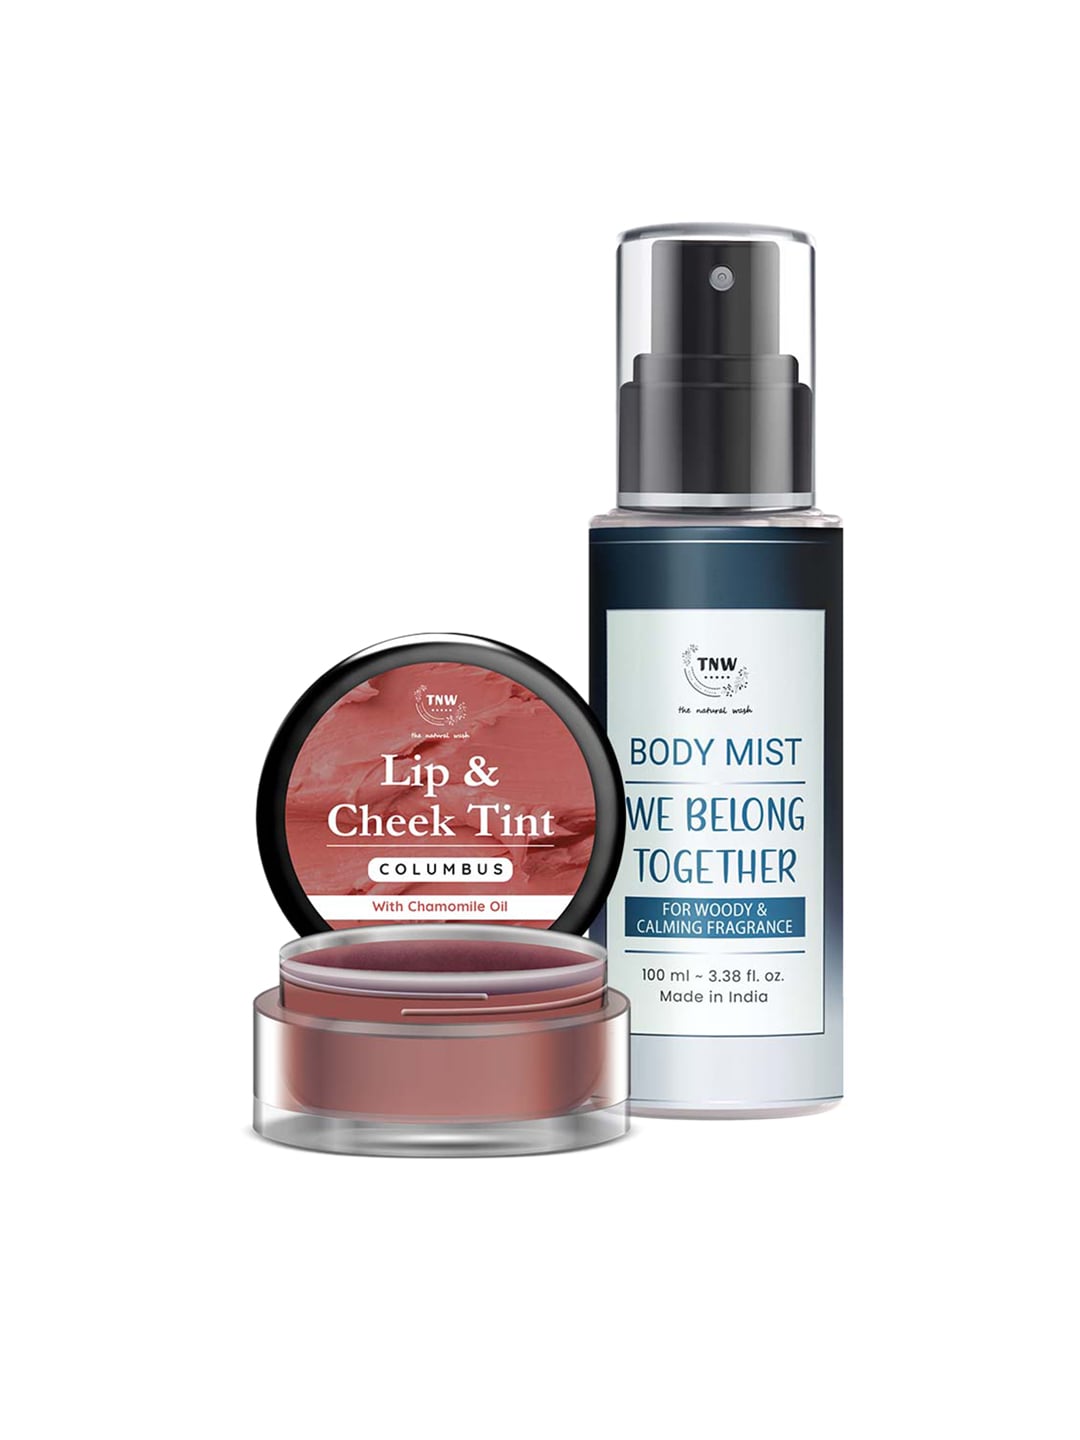 TNW the natural wash Columbus Lip & Cheek Tint - We Belong Together Body Mist Price in India